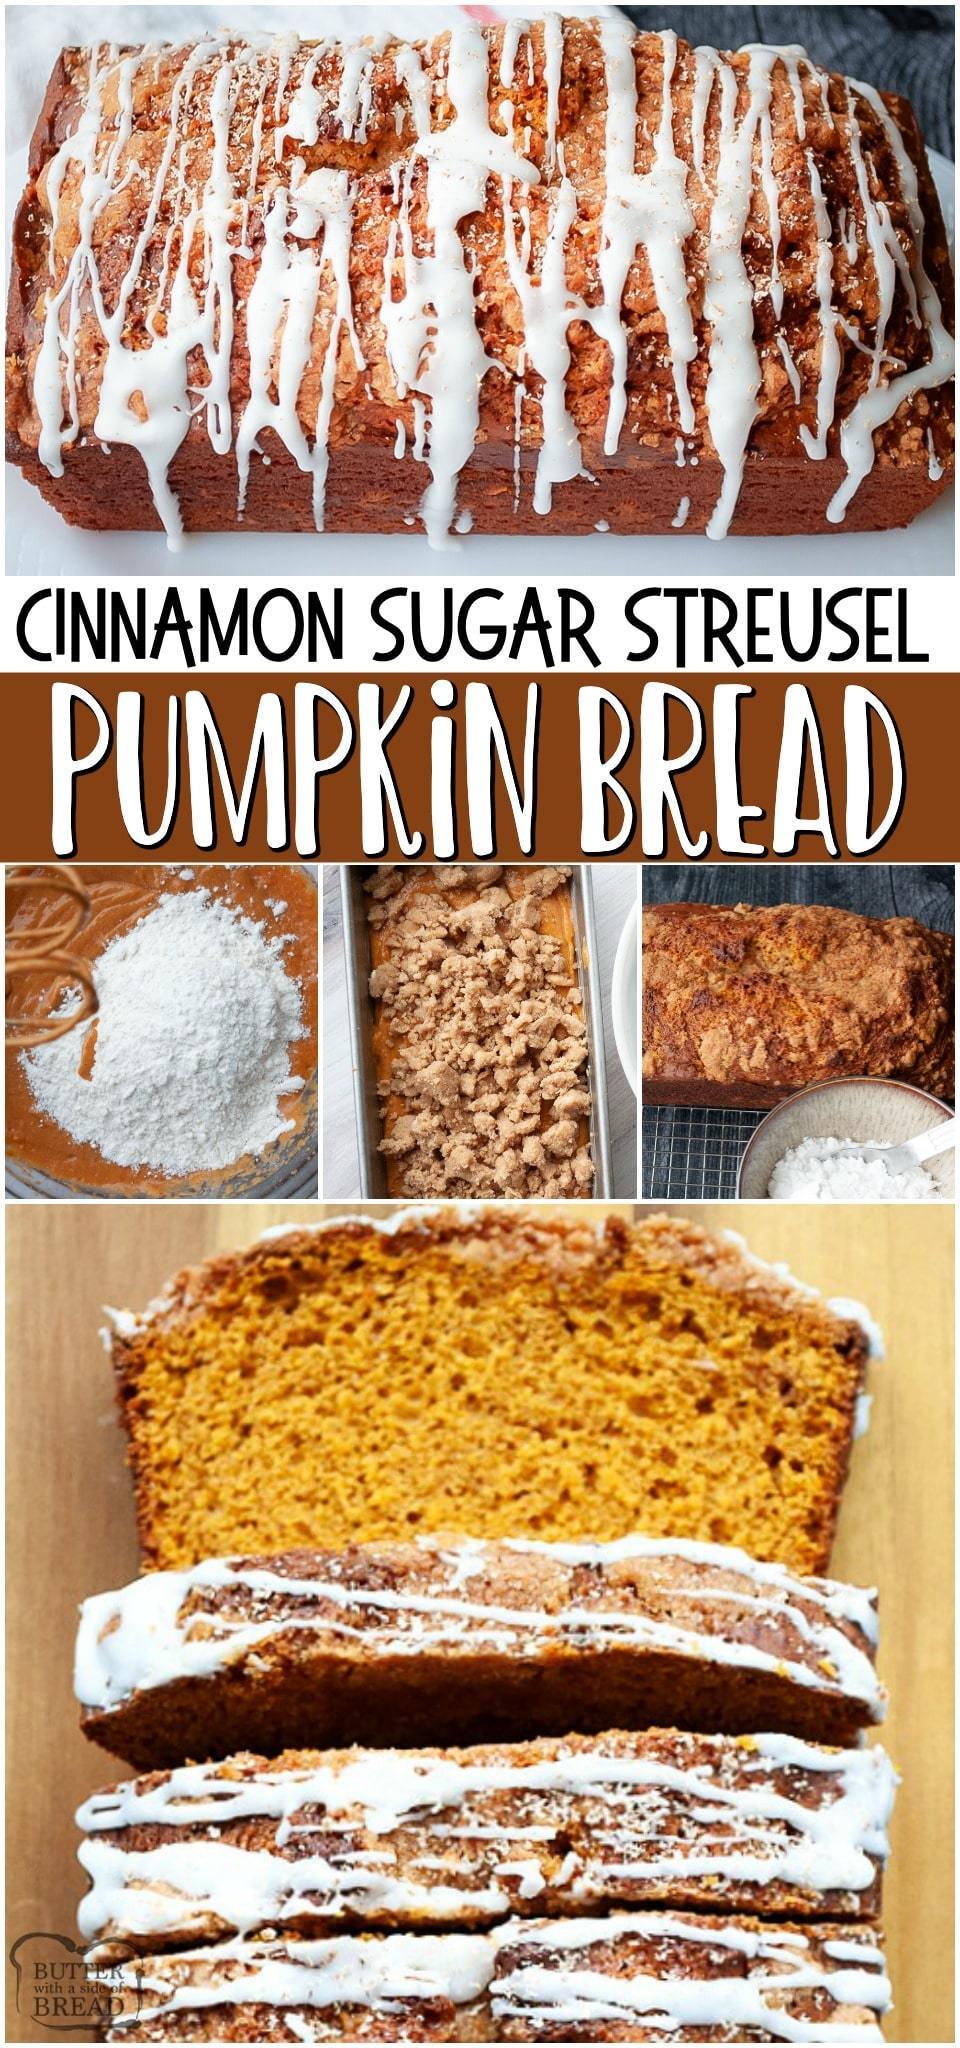 Pumpkin bread with streusel topping ~ classic pumpkin quick bread recipe made with pumpkin, brown sugar, spices & more. Moist pumpkin bread with cinnamon sugar topping and a simple glaze, this bread is a perfect snack or treat.